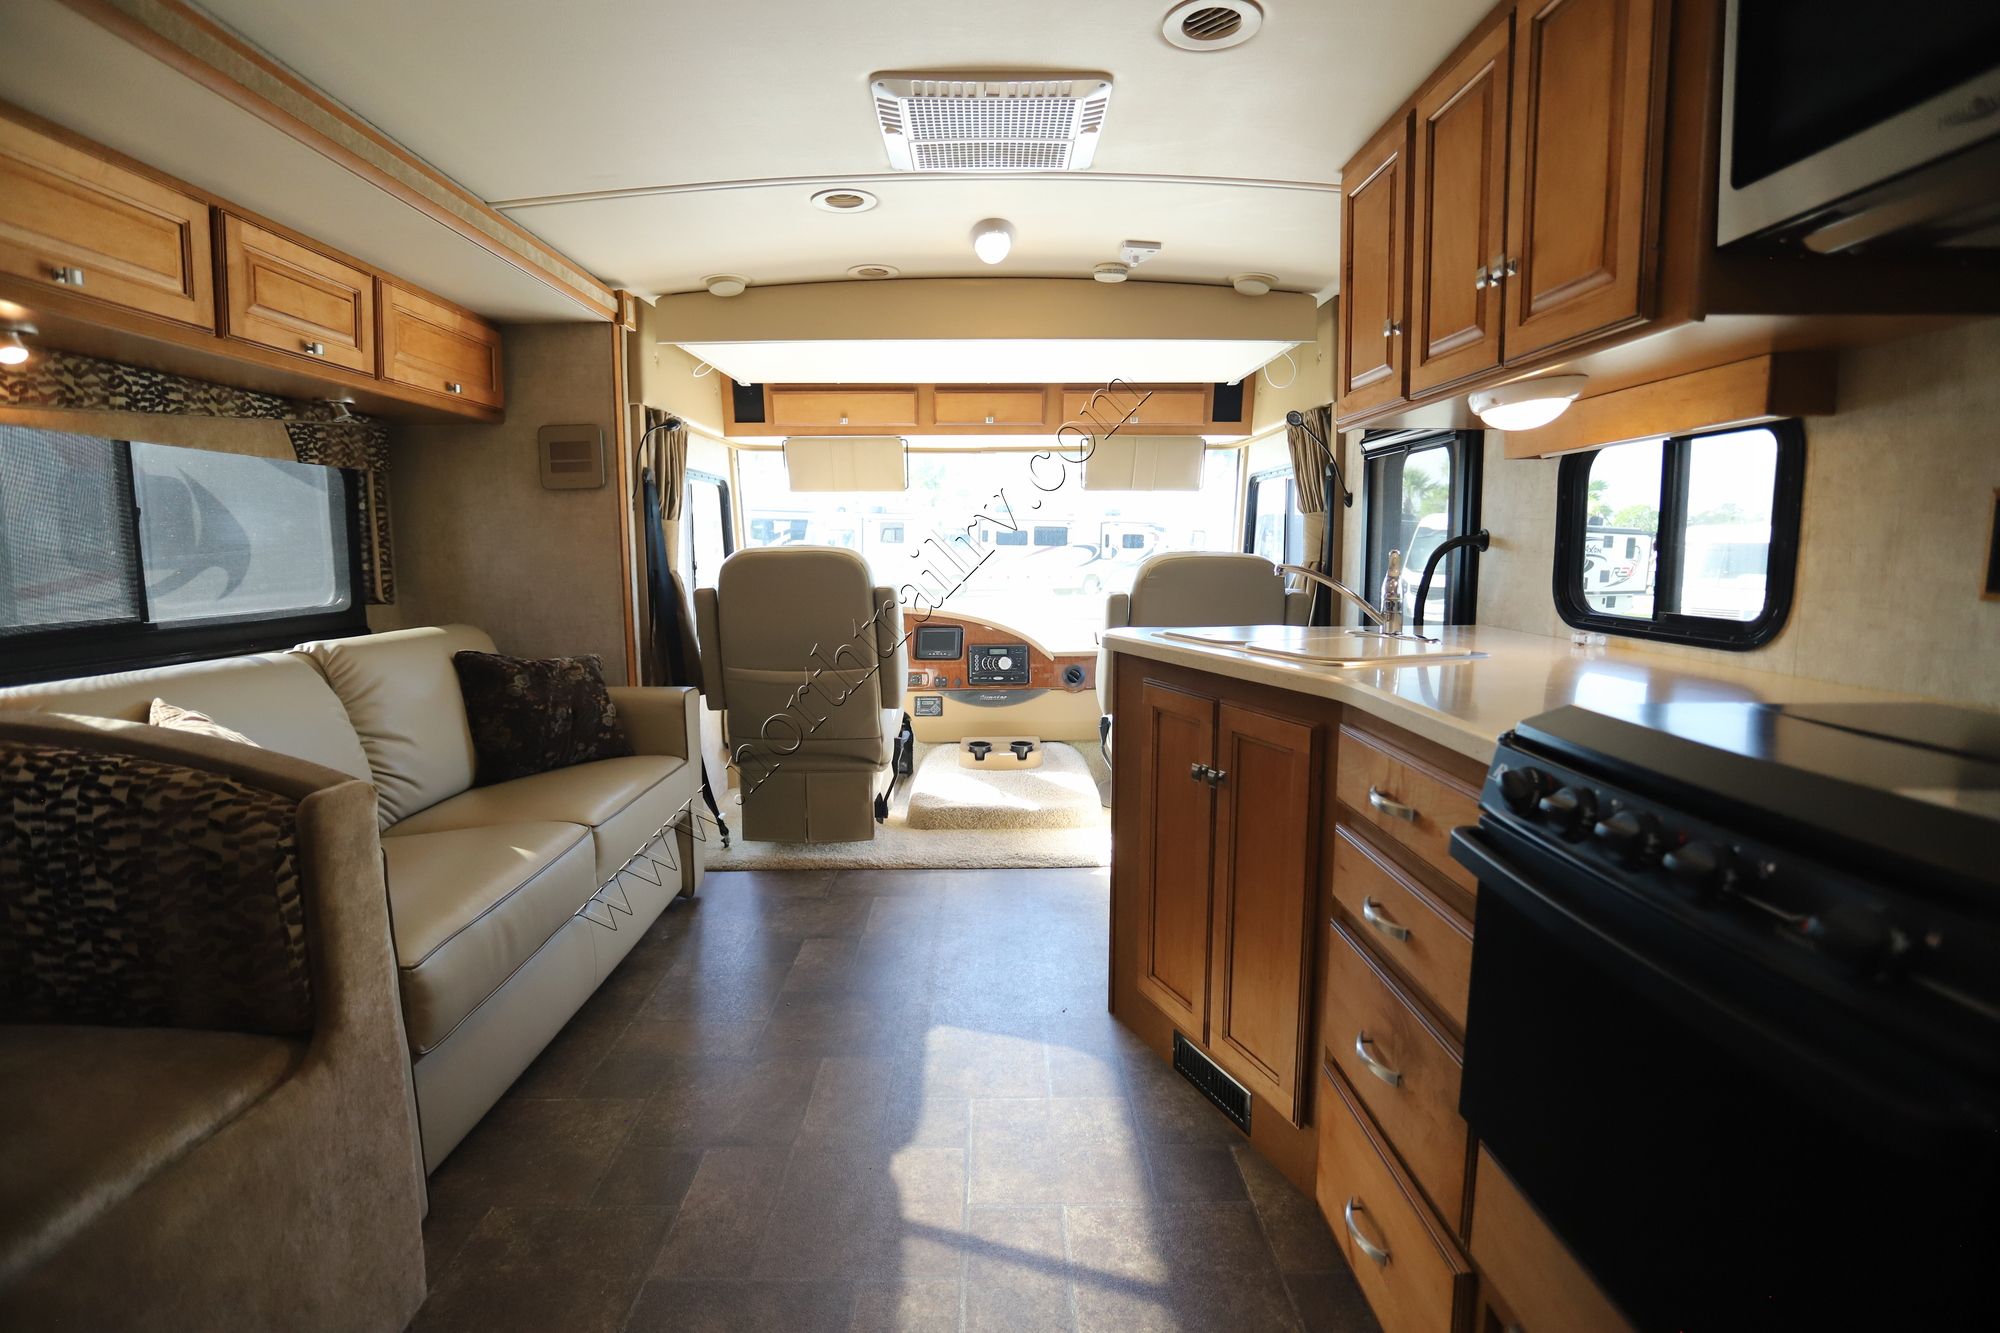 Used 2014 Itasca Sunstar 35B Class A  For Sale